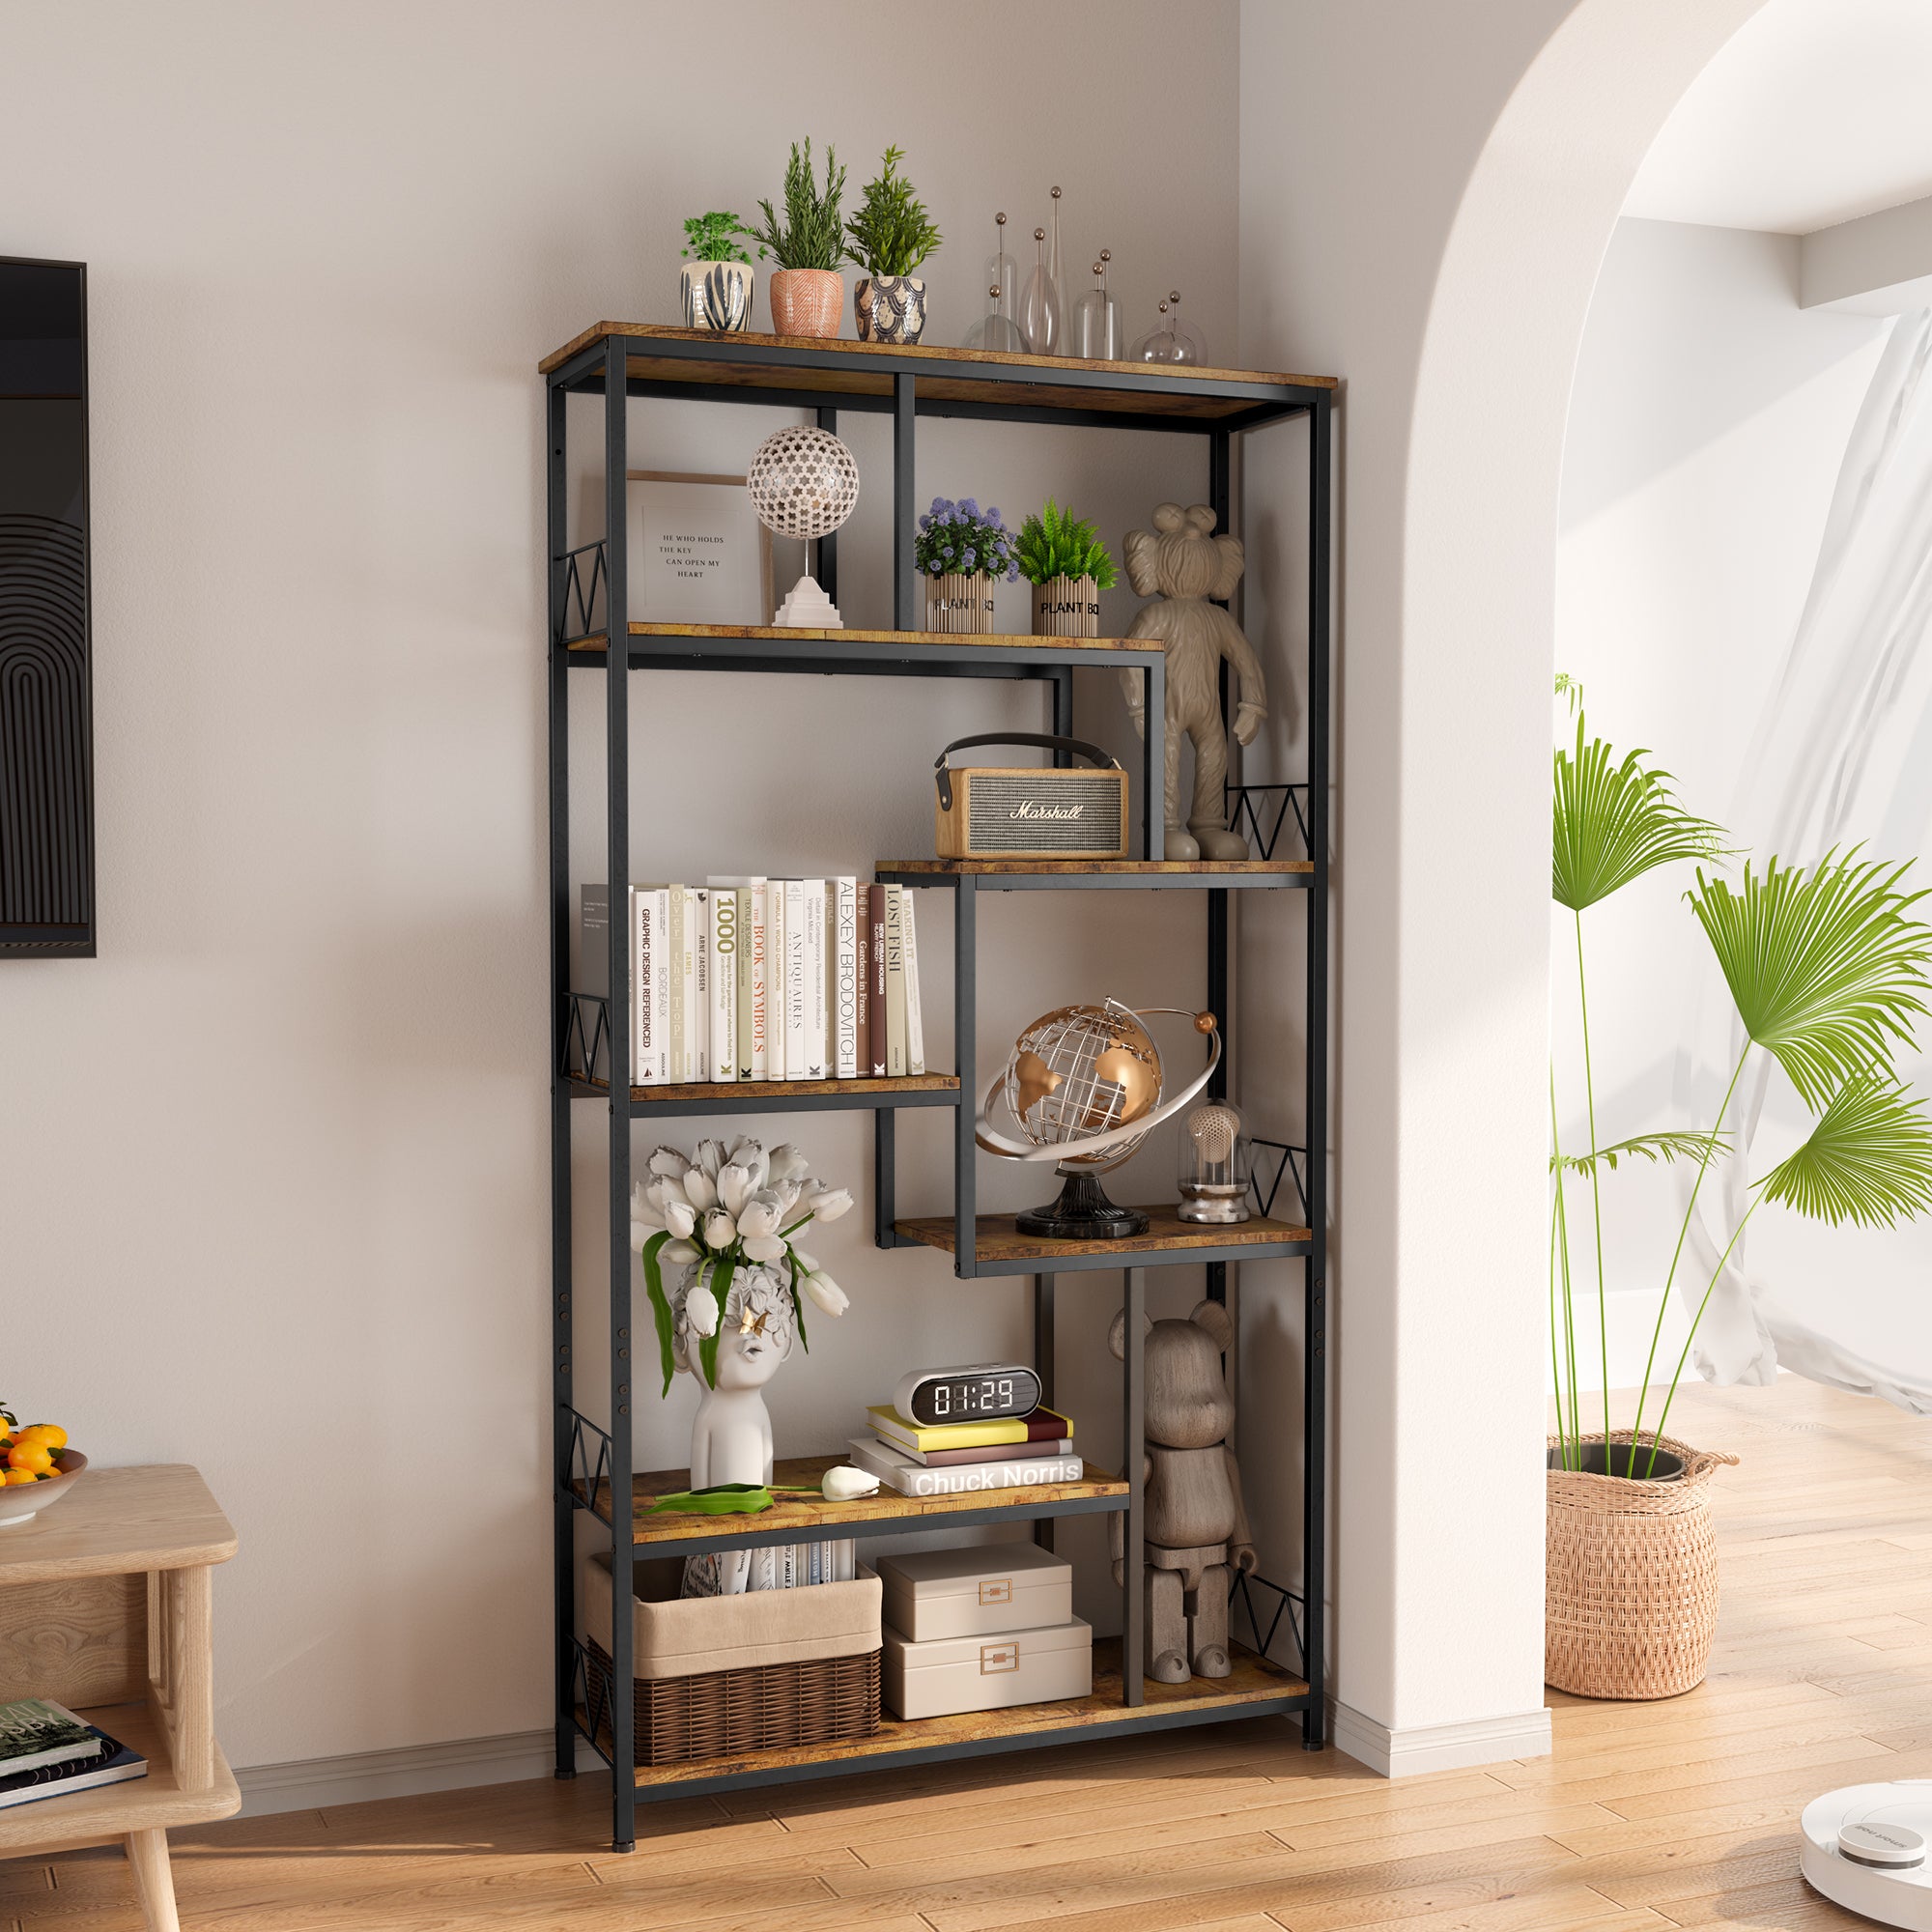 Gizoon FS13 71” Industrial Metal Frame Staggered Bookshelves for Storage